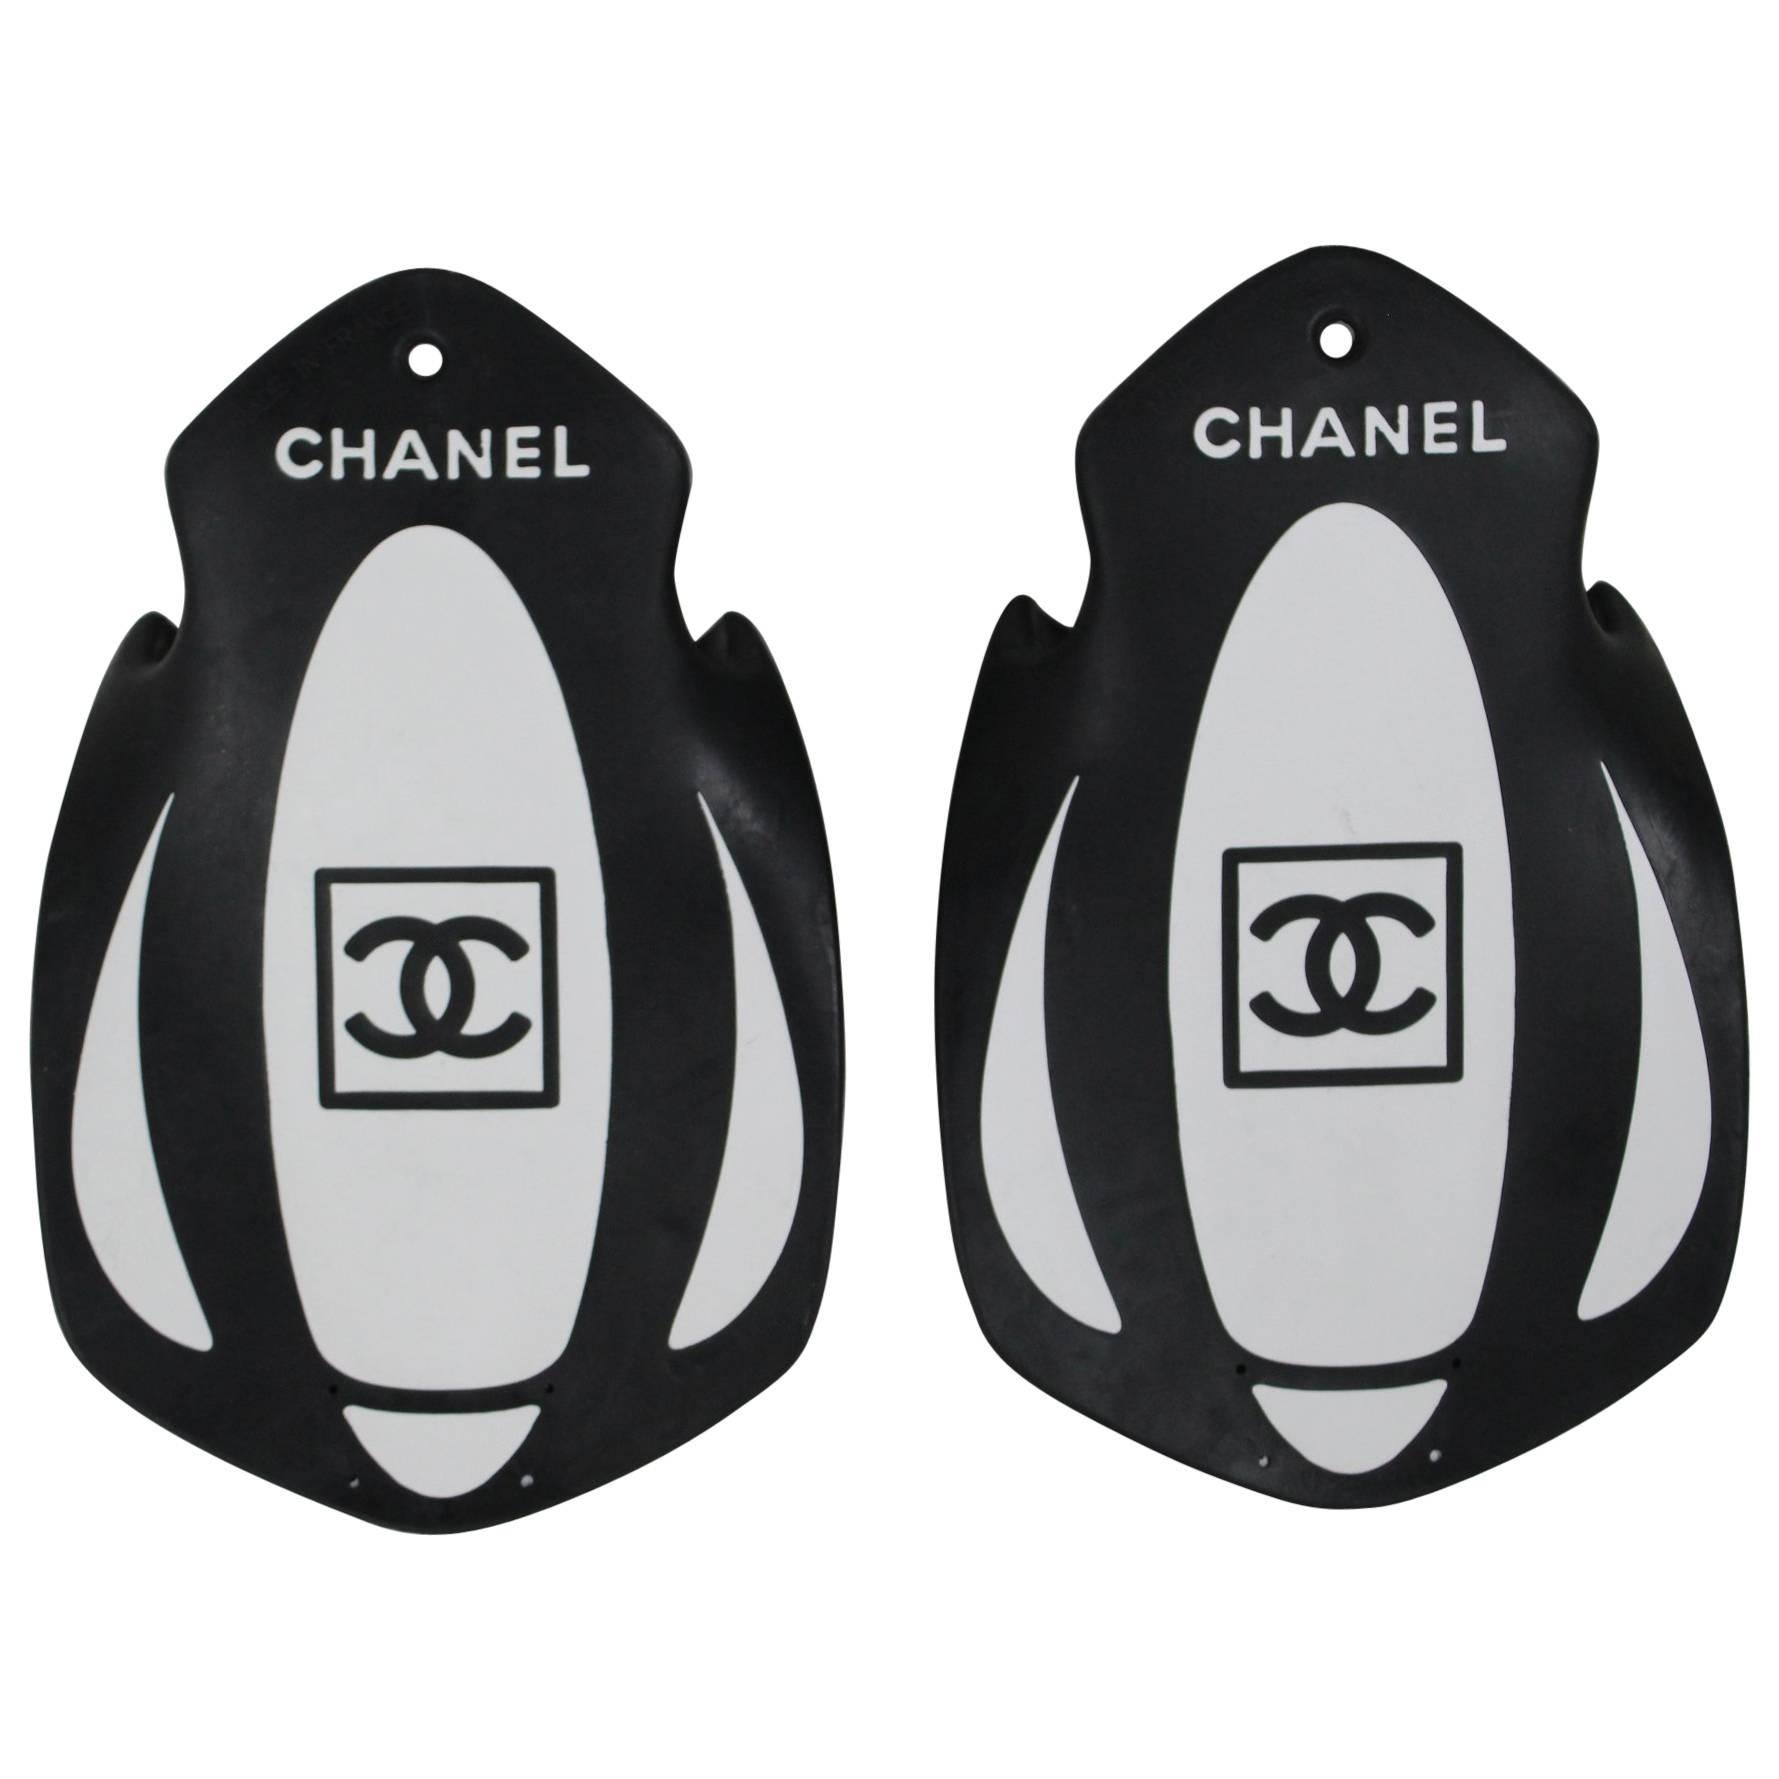 Rare Hard to find Chanel Swimming Fins from the Sport Line